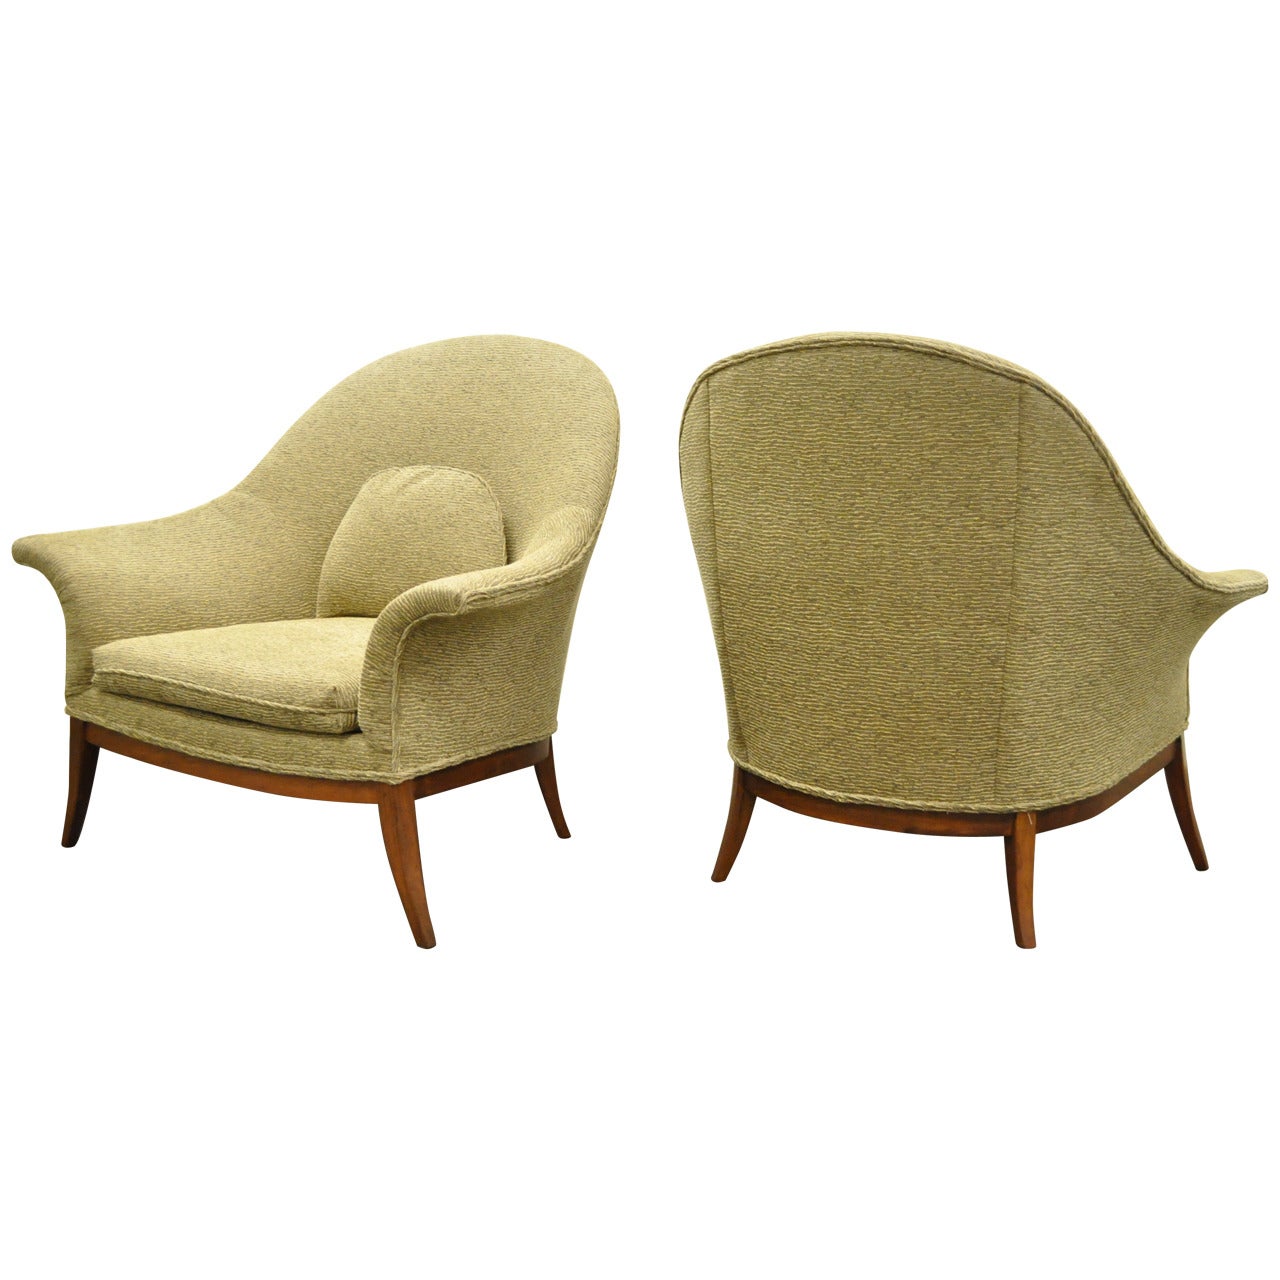 Remarkable Pair of Sculpted Frame Club or Lounge Chairs after Edward Wormley For Sale